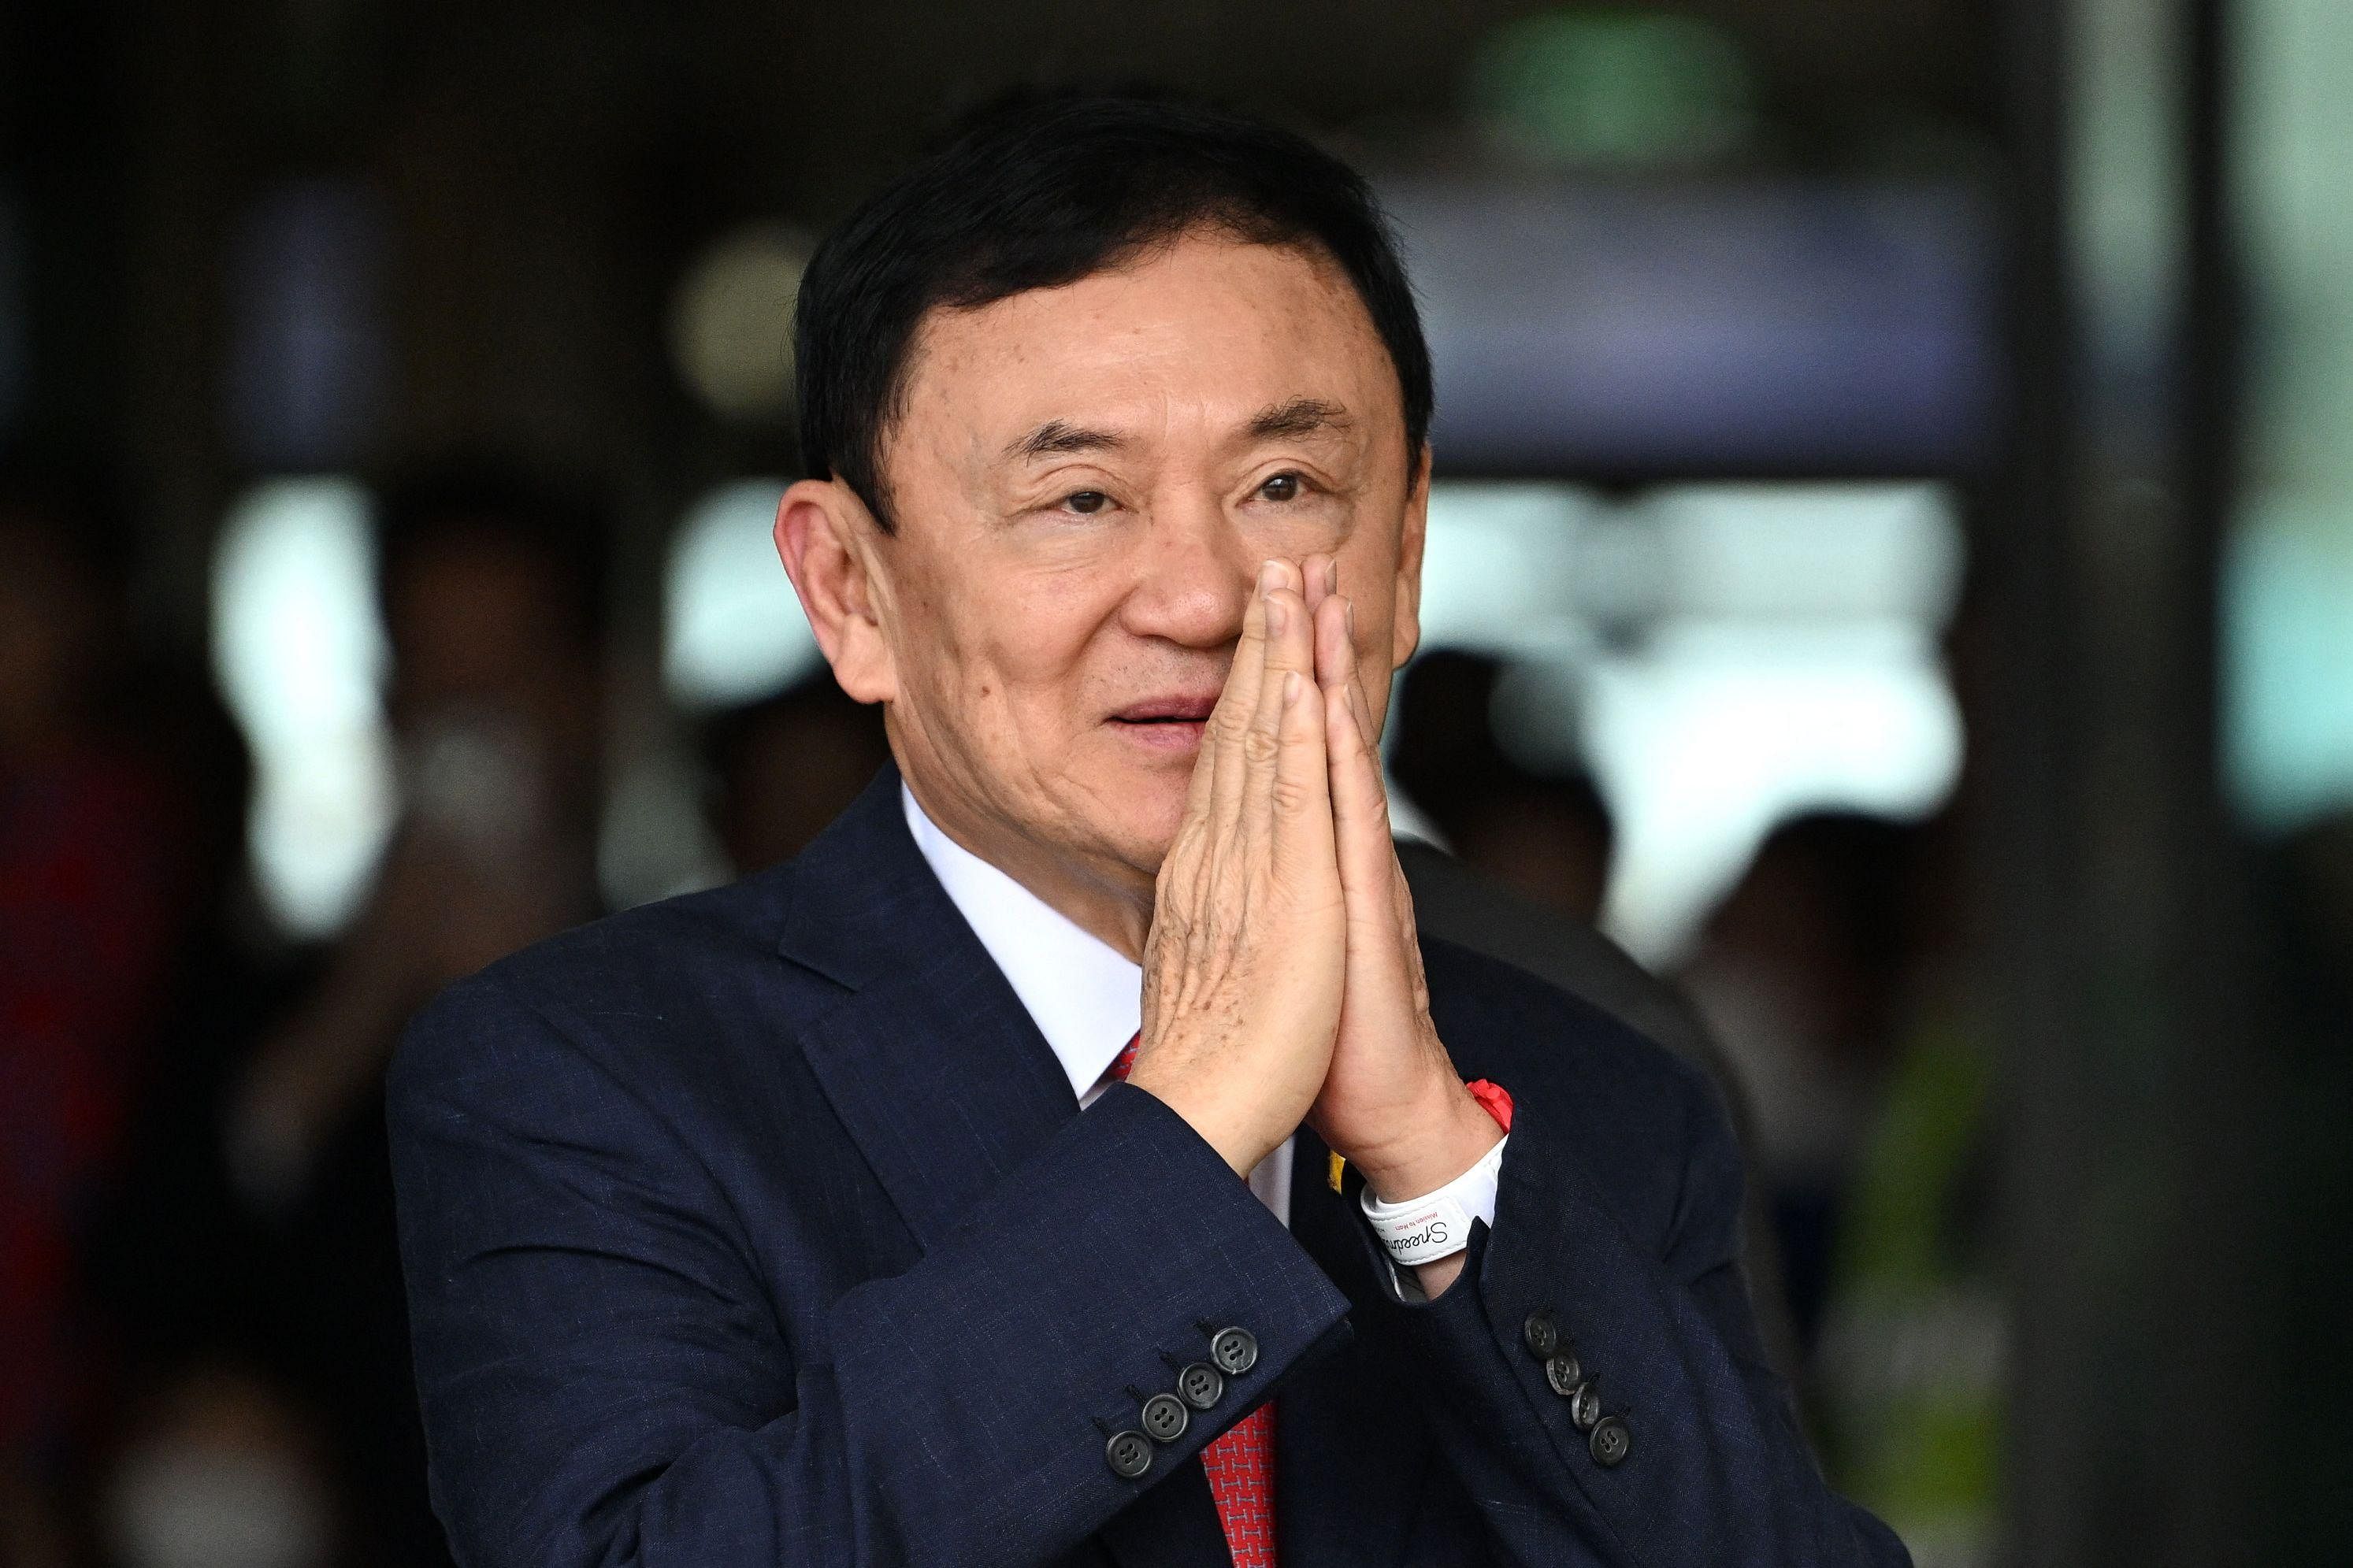 Thaksin-linked Thai TV broadcaster to shut down after 15 years